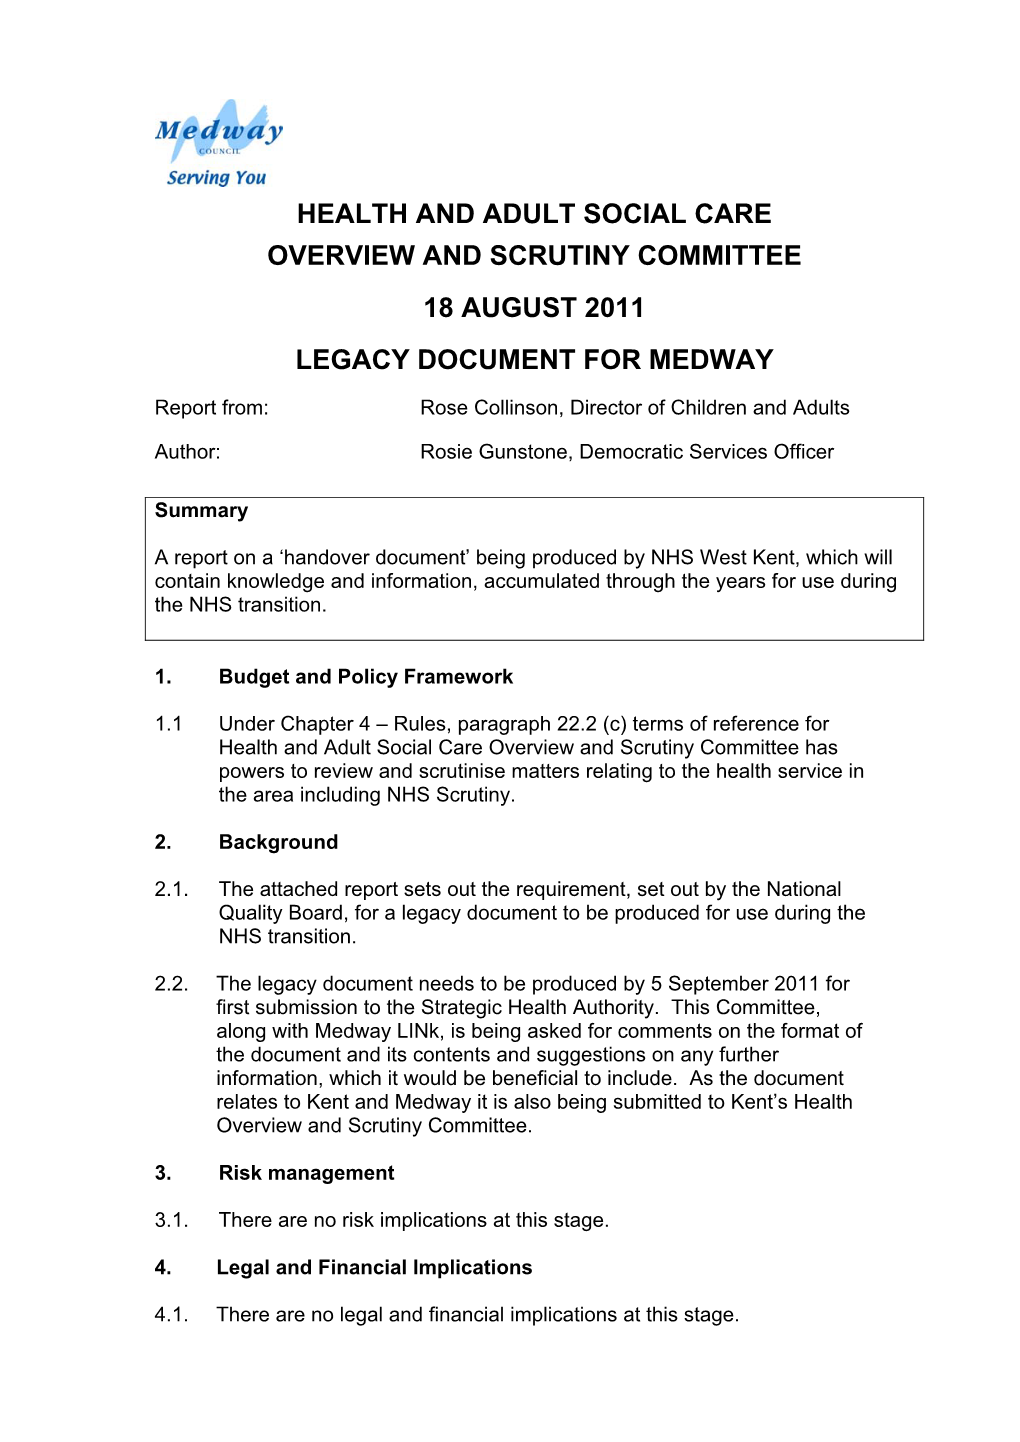 Health and Adult Social Care Overview and Scrutiny Committee 18 August